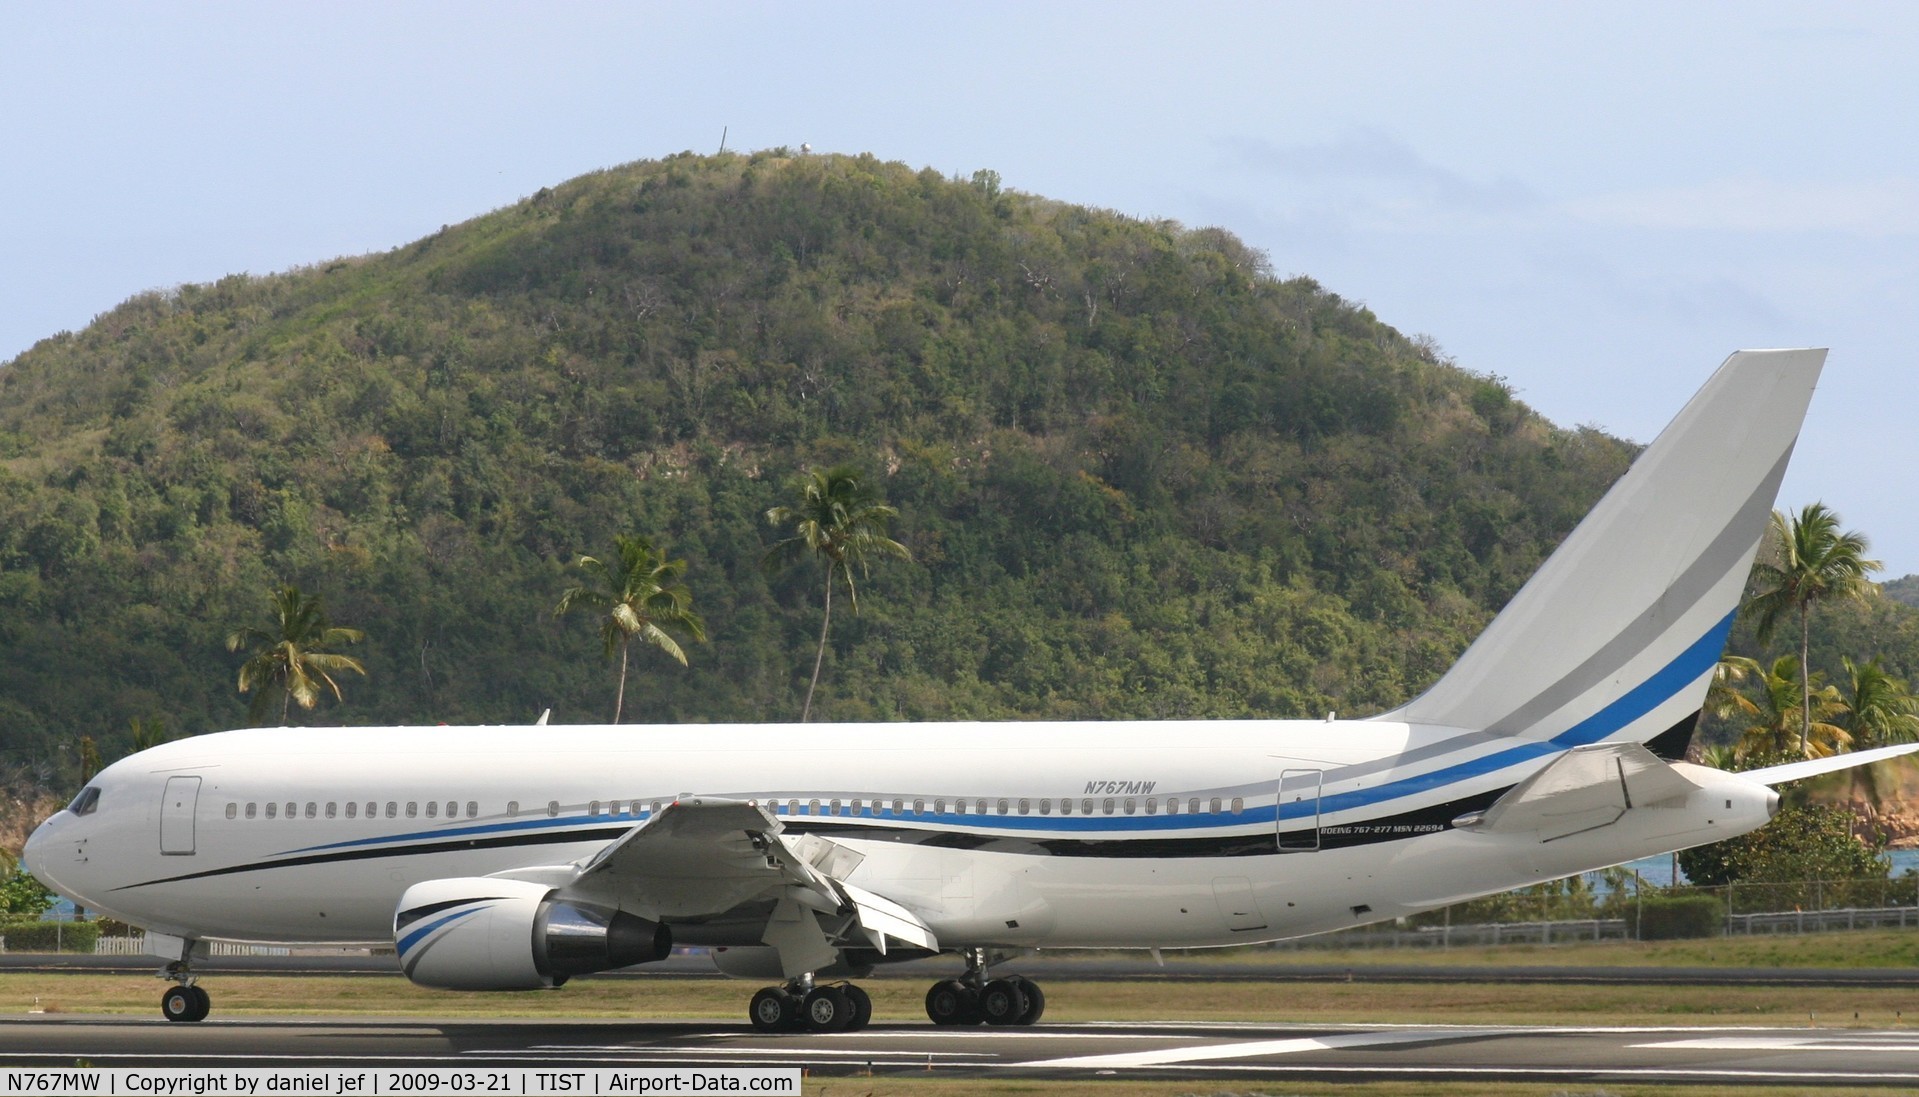 N767MW, 1982 Boeing 767-277 C/N 22694, rolling out at tist